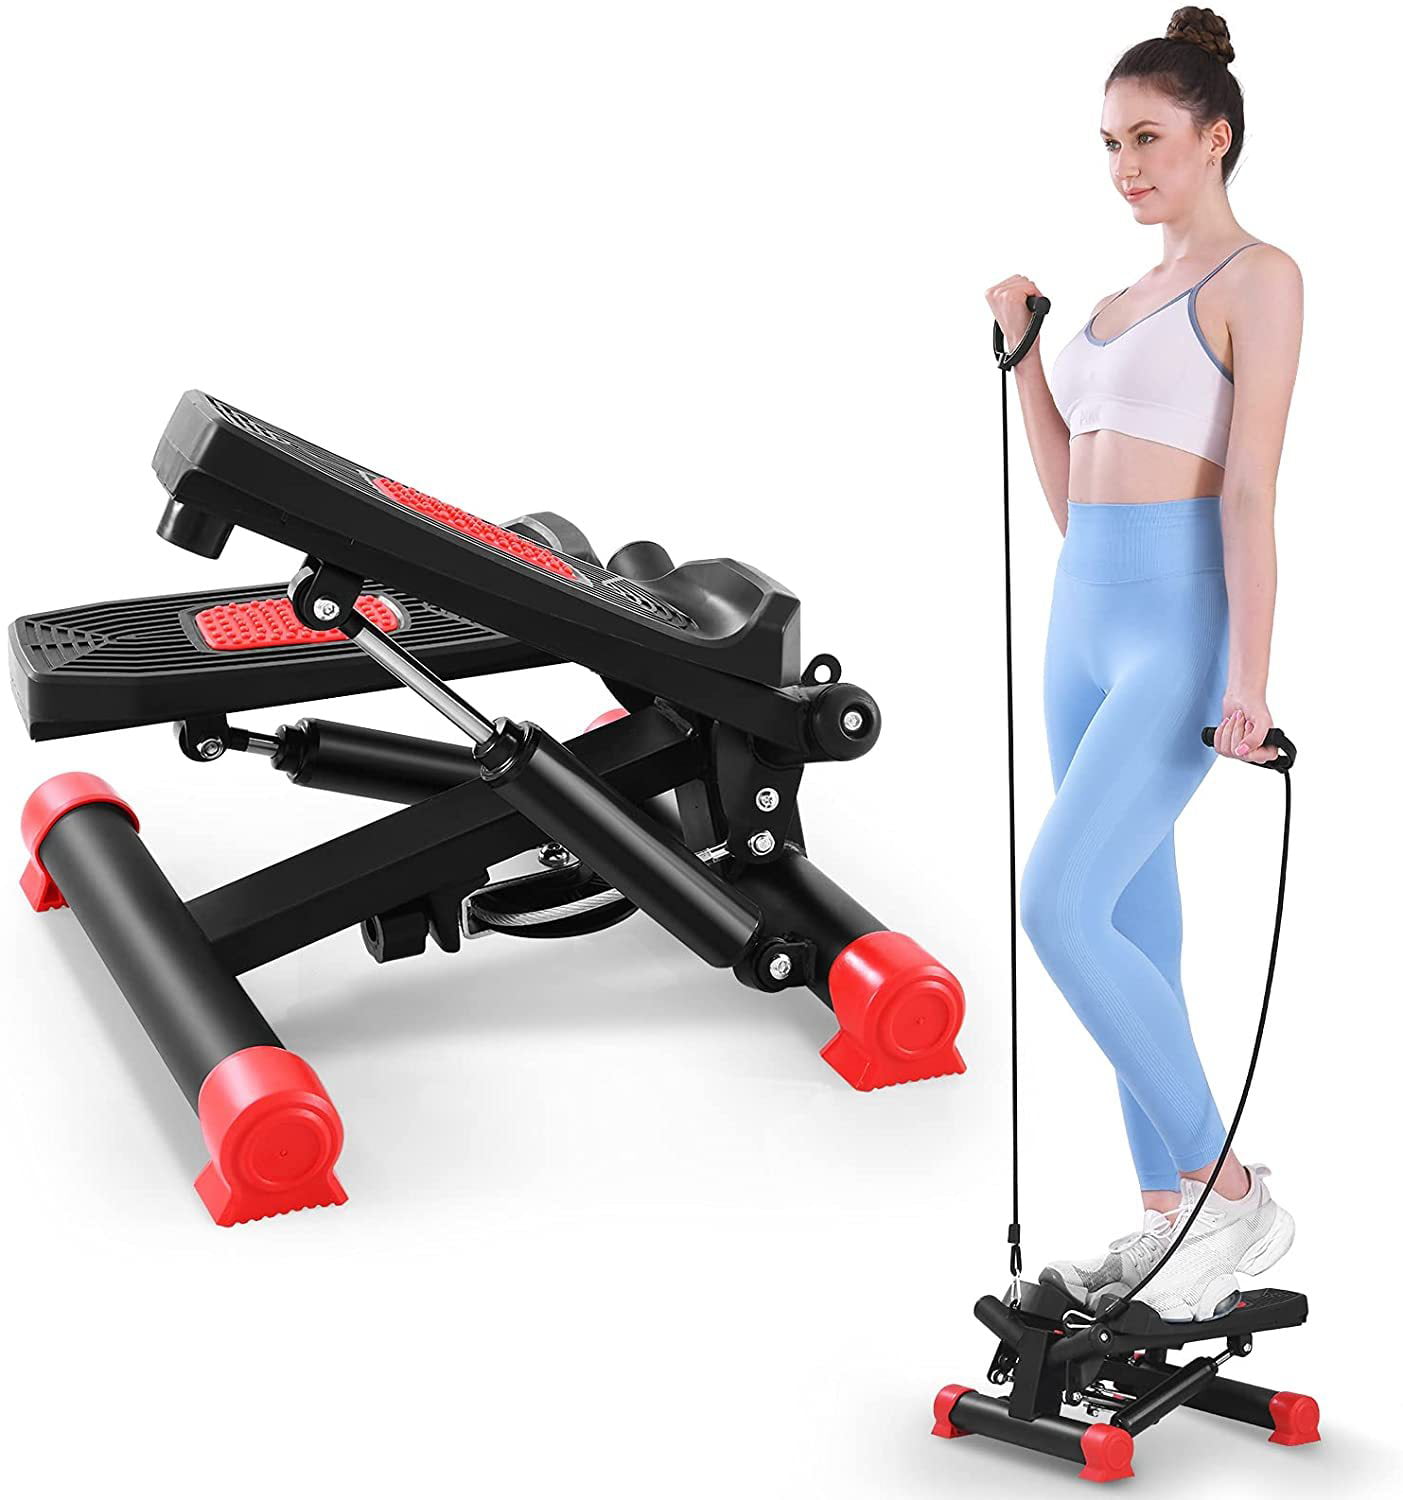 Mini Stair Stepper Exercise Equipment for Home Workouts Steppers for Exercise Workout with Resistance Bands 